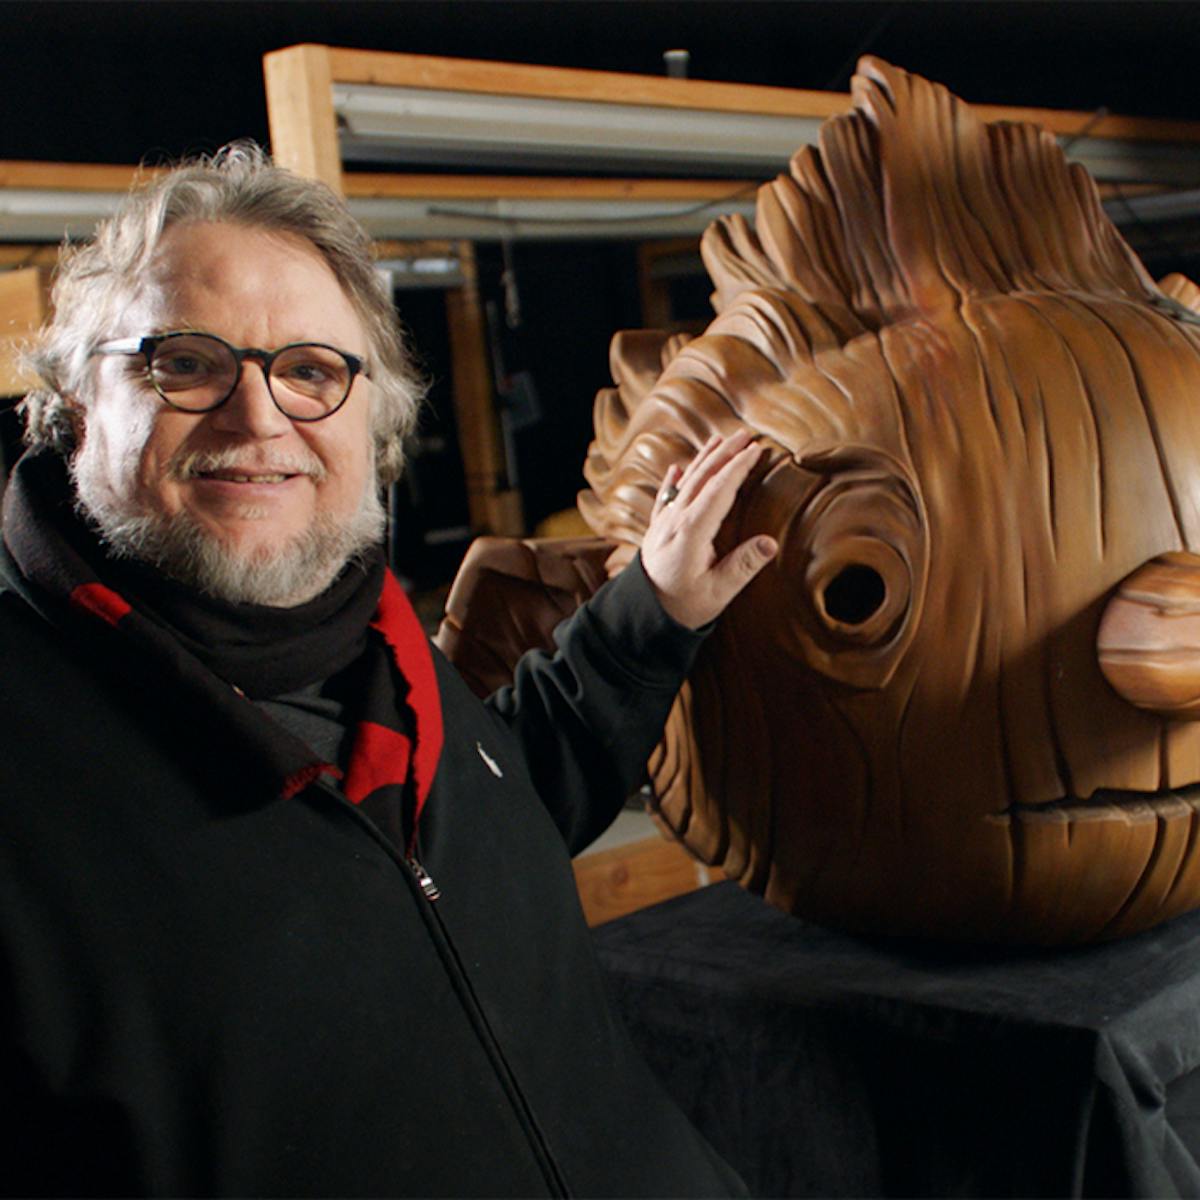 Guillermo del Toro stands next to Pinocchio’s head. Del Toro wears a black jacket and a black-and-red scarf. 